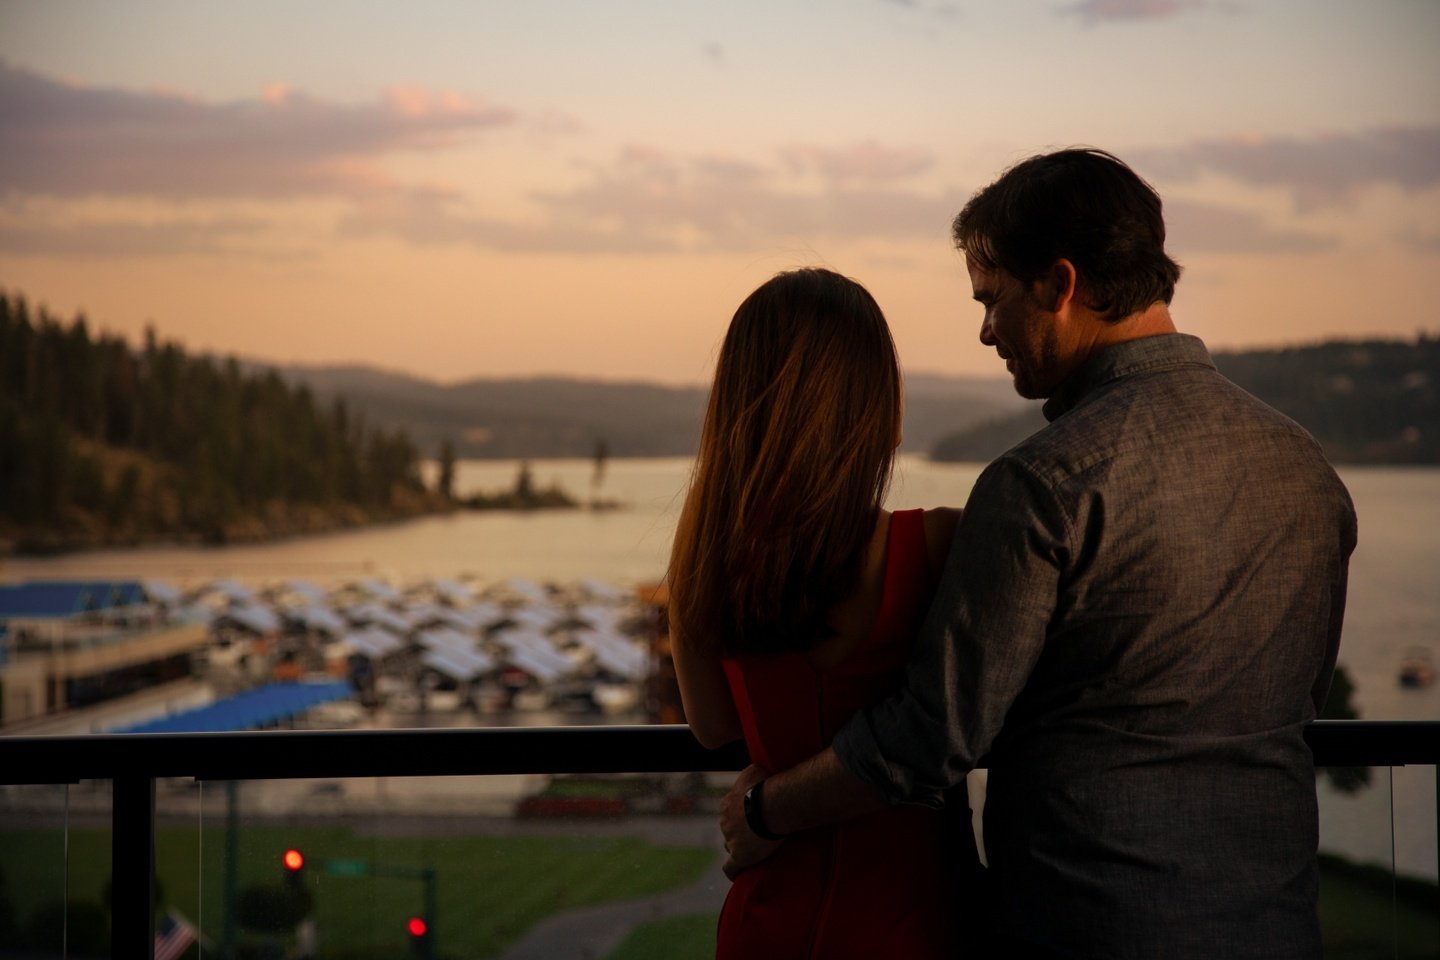 You + your person + this view = the perfect getaway